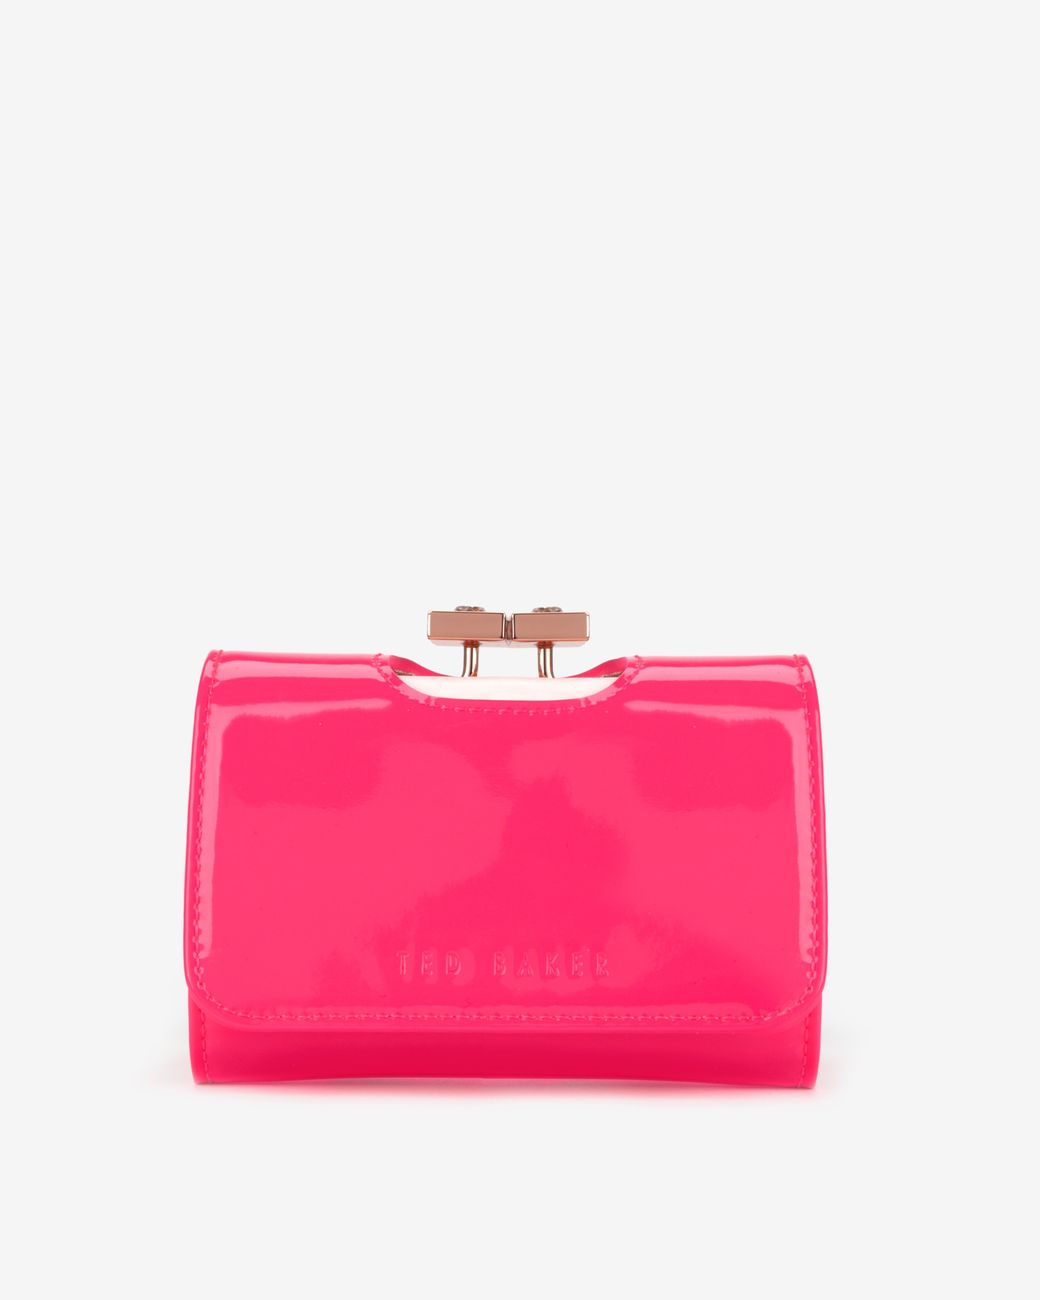 Ted Baker Small Patent Leather Purse in Bright Pink (Pink) | Lyst UK